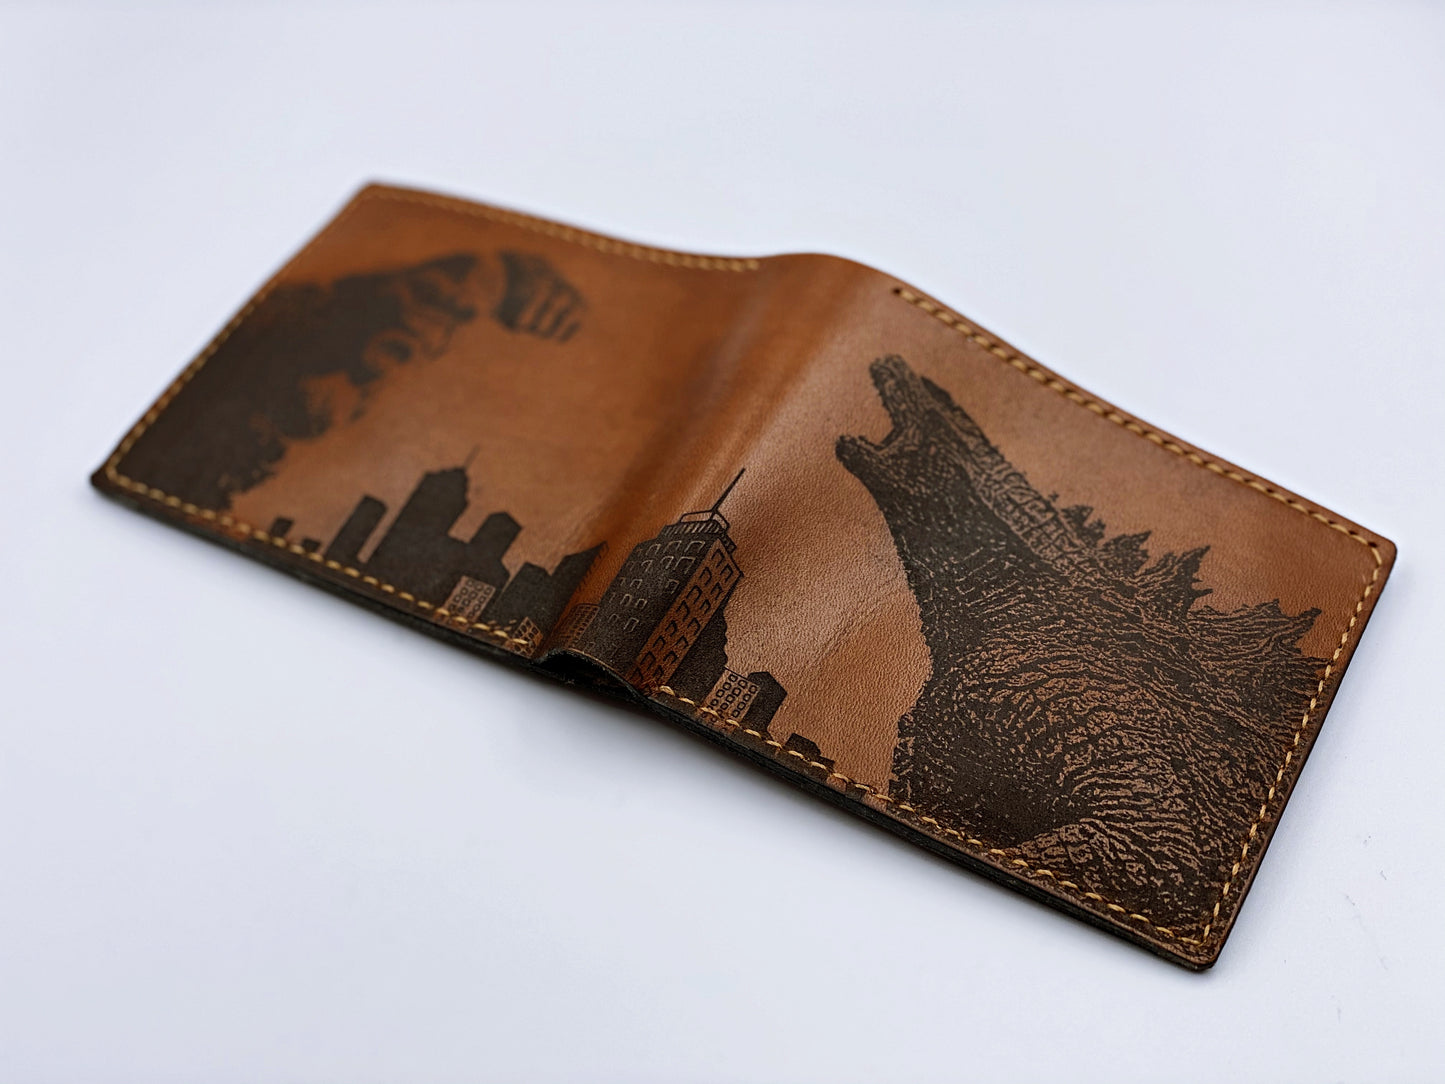 Mayan Corner - King kong vs Godzilla monster leather handmade men's wallet, custom gifts for him, father's day gifts, anniversary gift for men